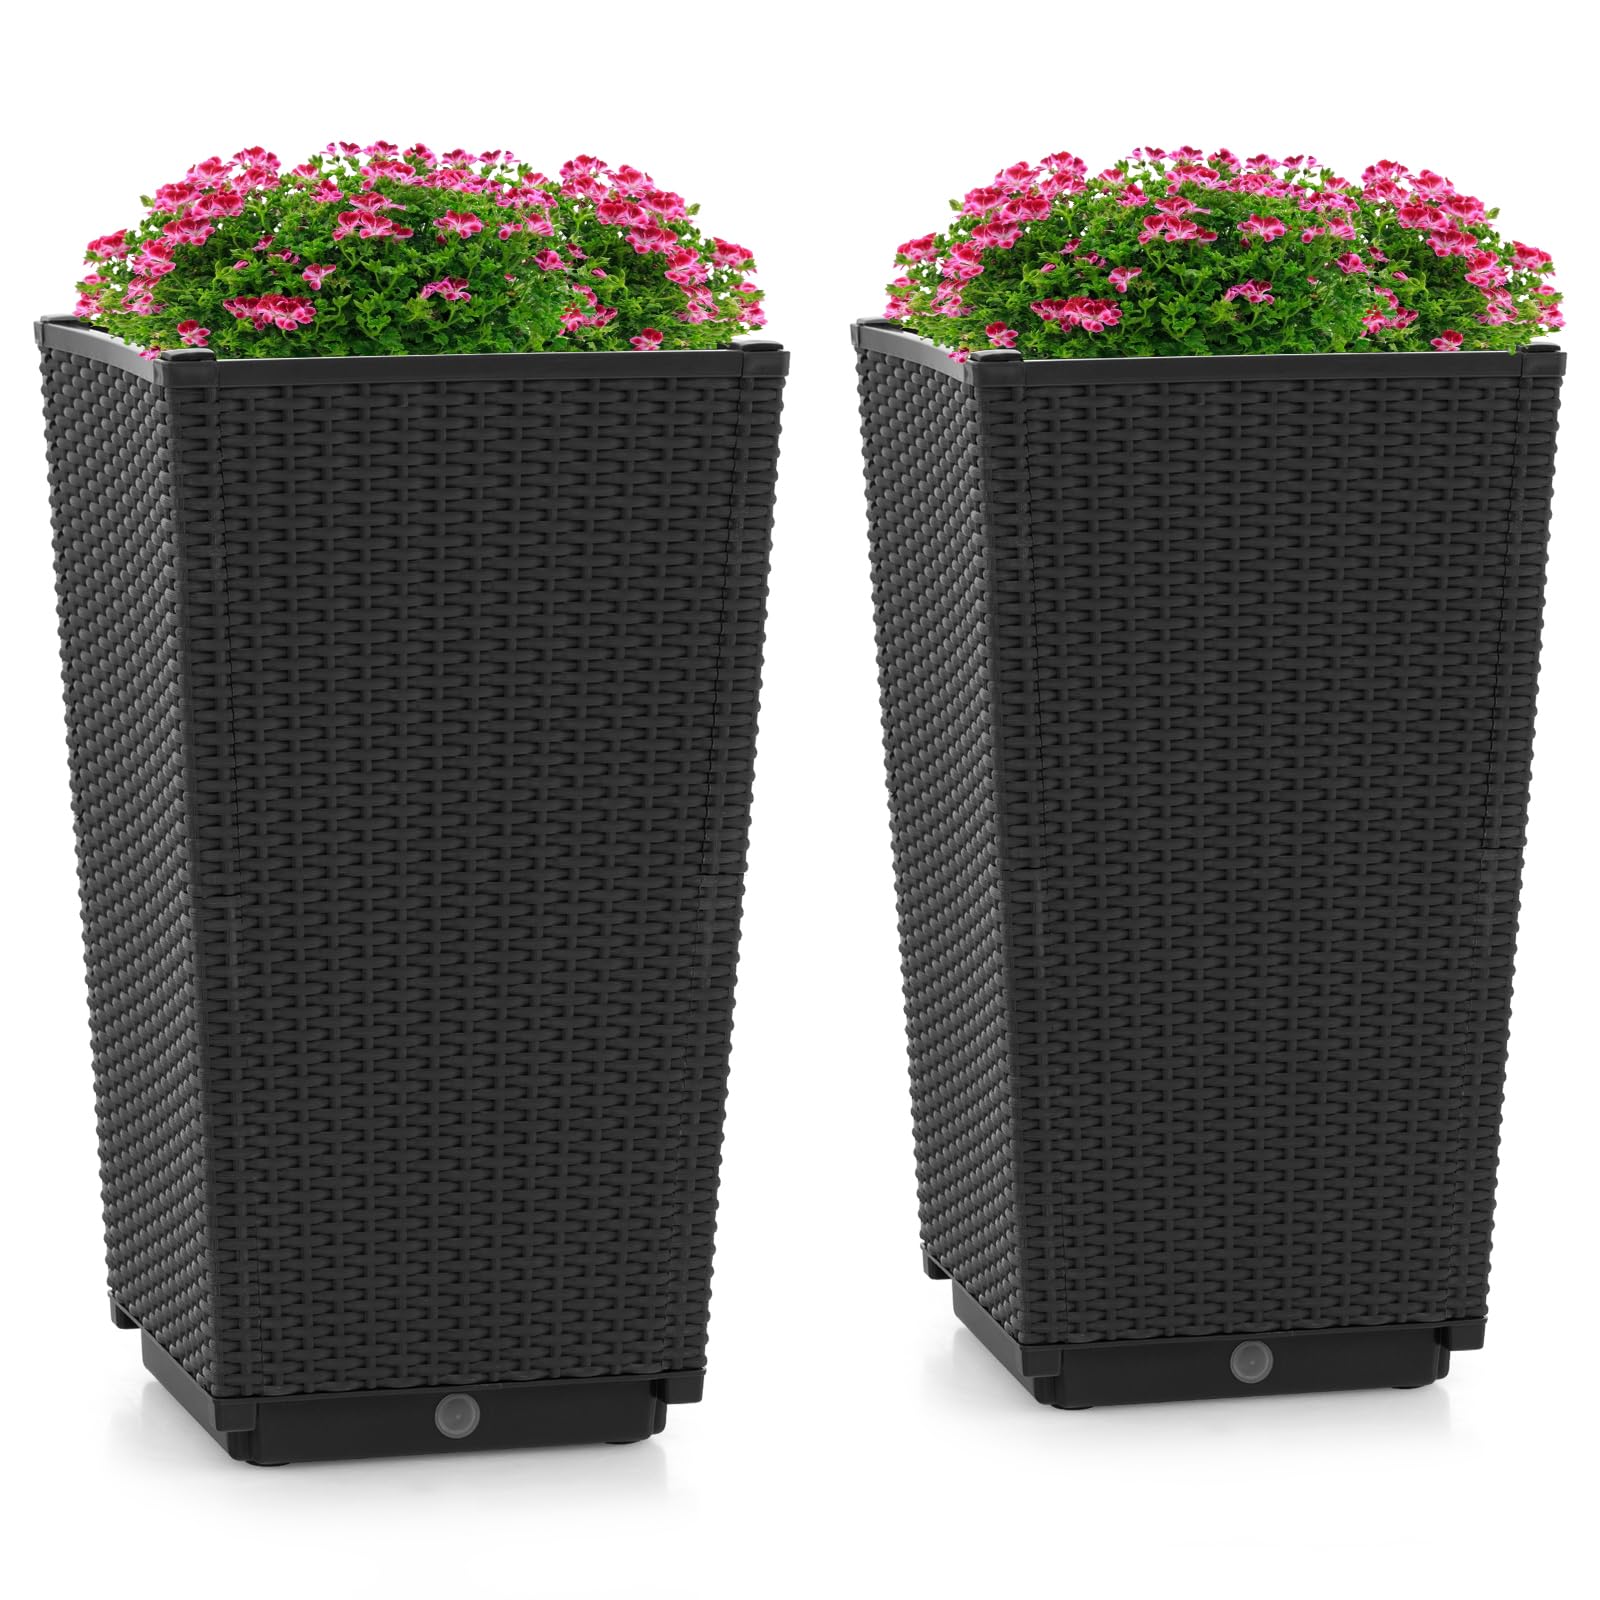 Giantex Outdoor Wicker Flower Pot Set of 2, 22.5” Tall Planters with Drainage Hole, Self-Watering Tray